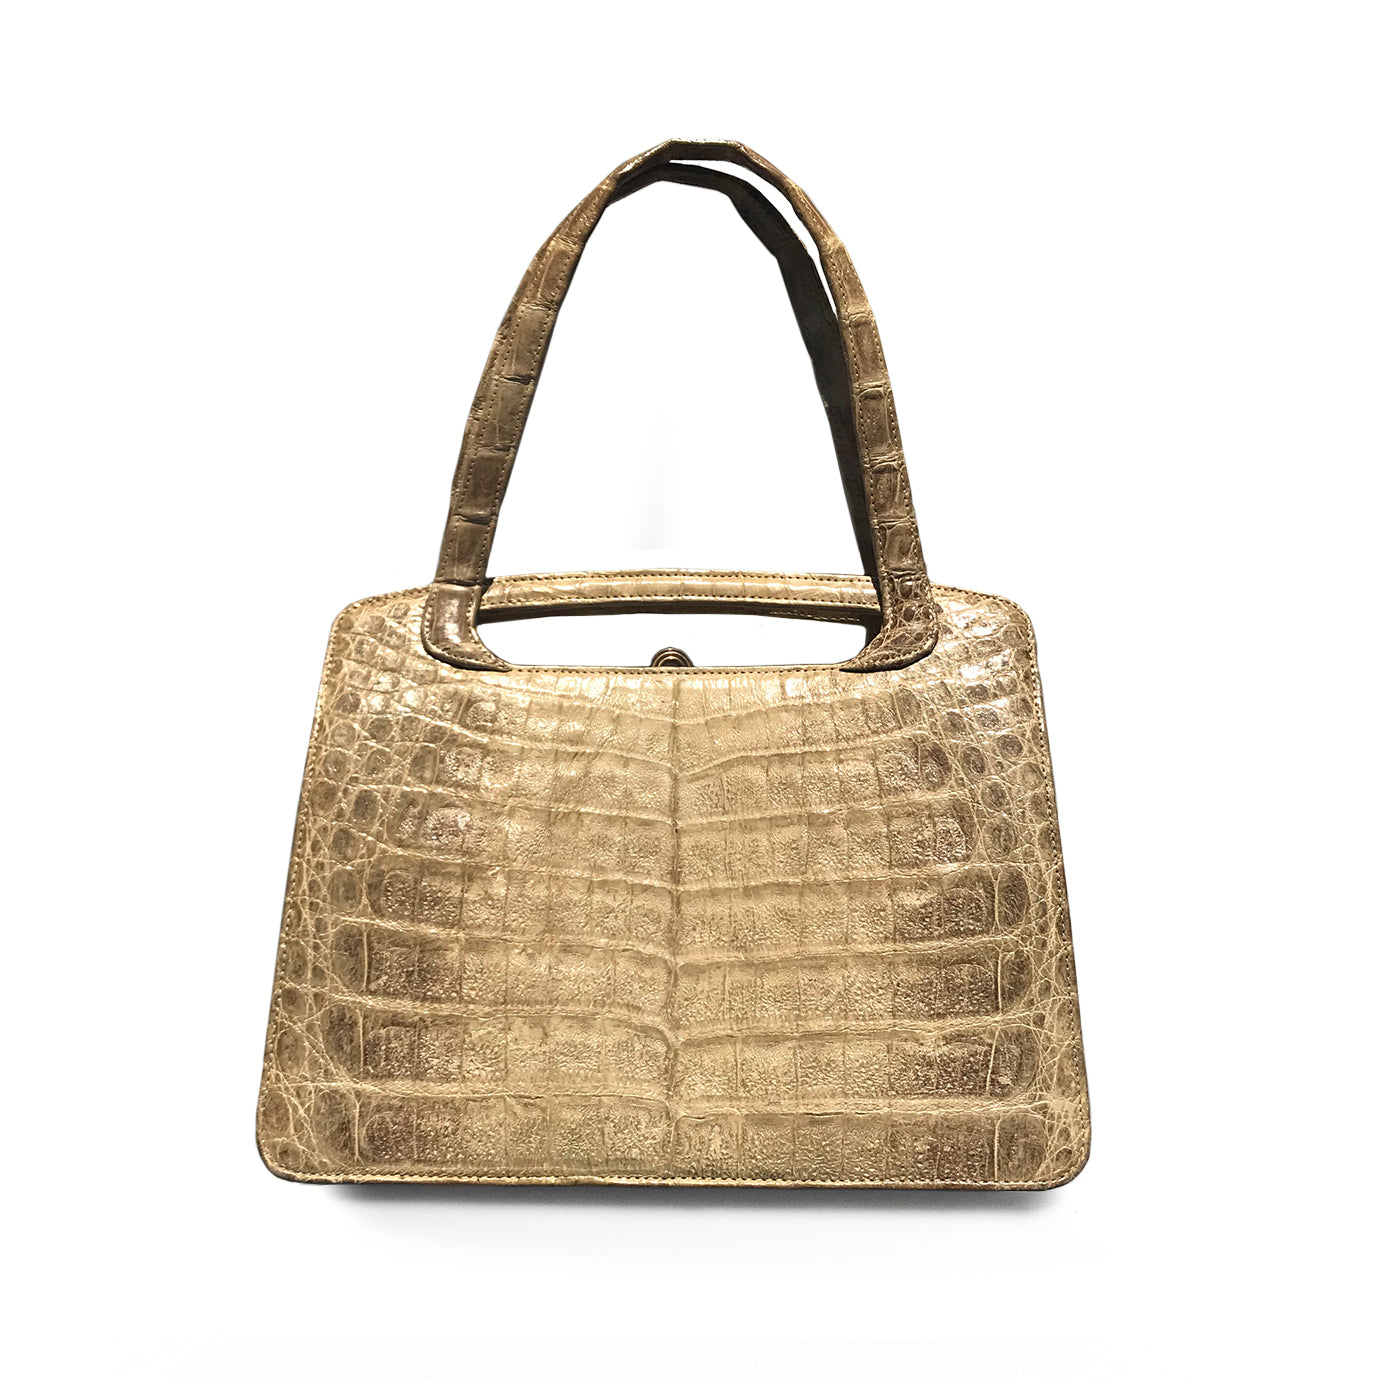 Vintage Cream Croc Handbag. Find this and other Beautiful Vintage Bags & Purses for sale at Intovintage.co.uk.